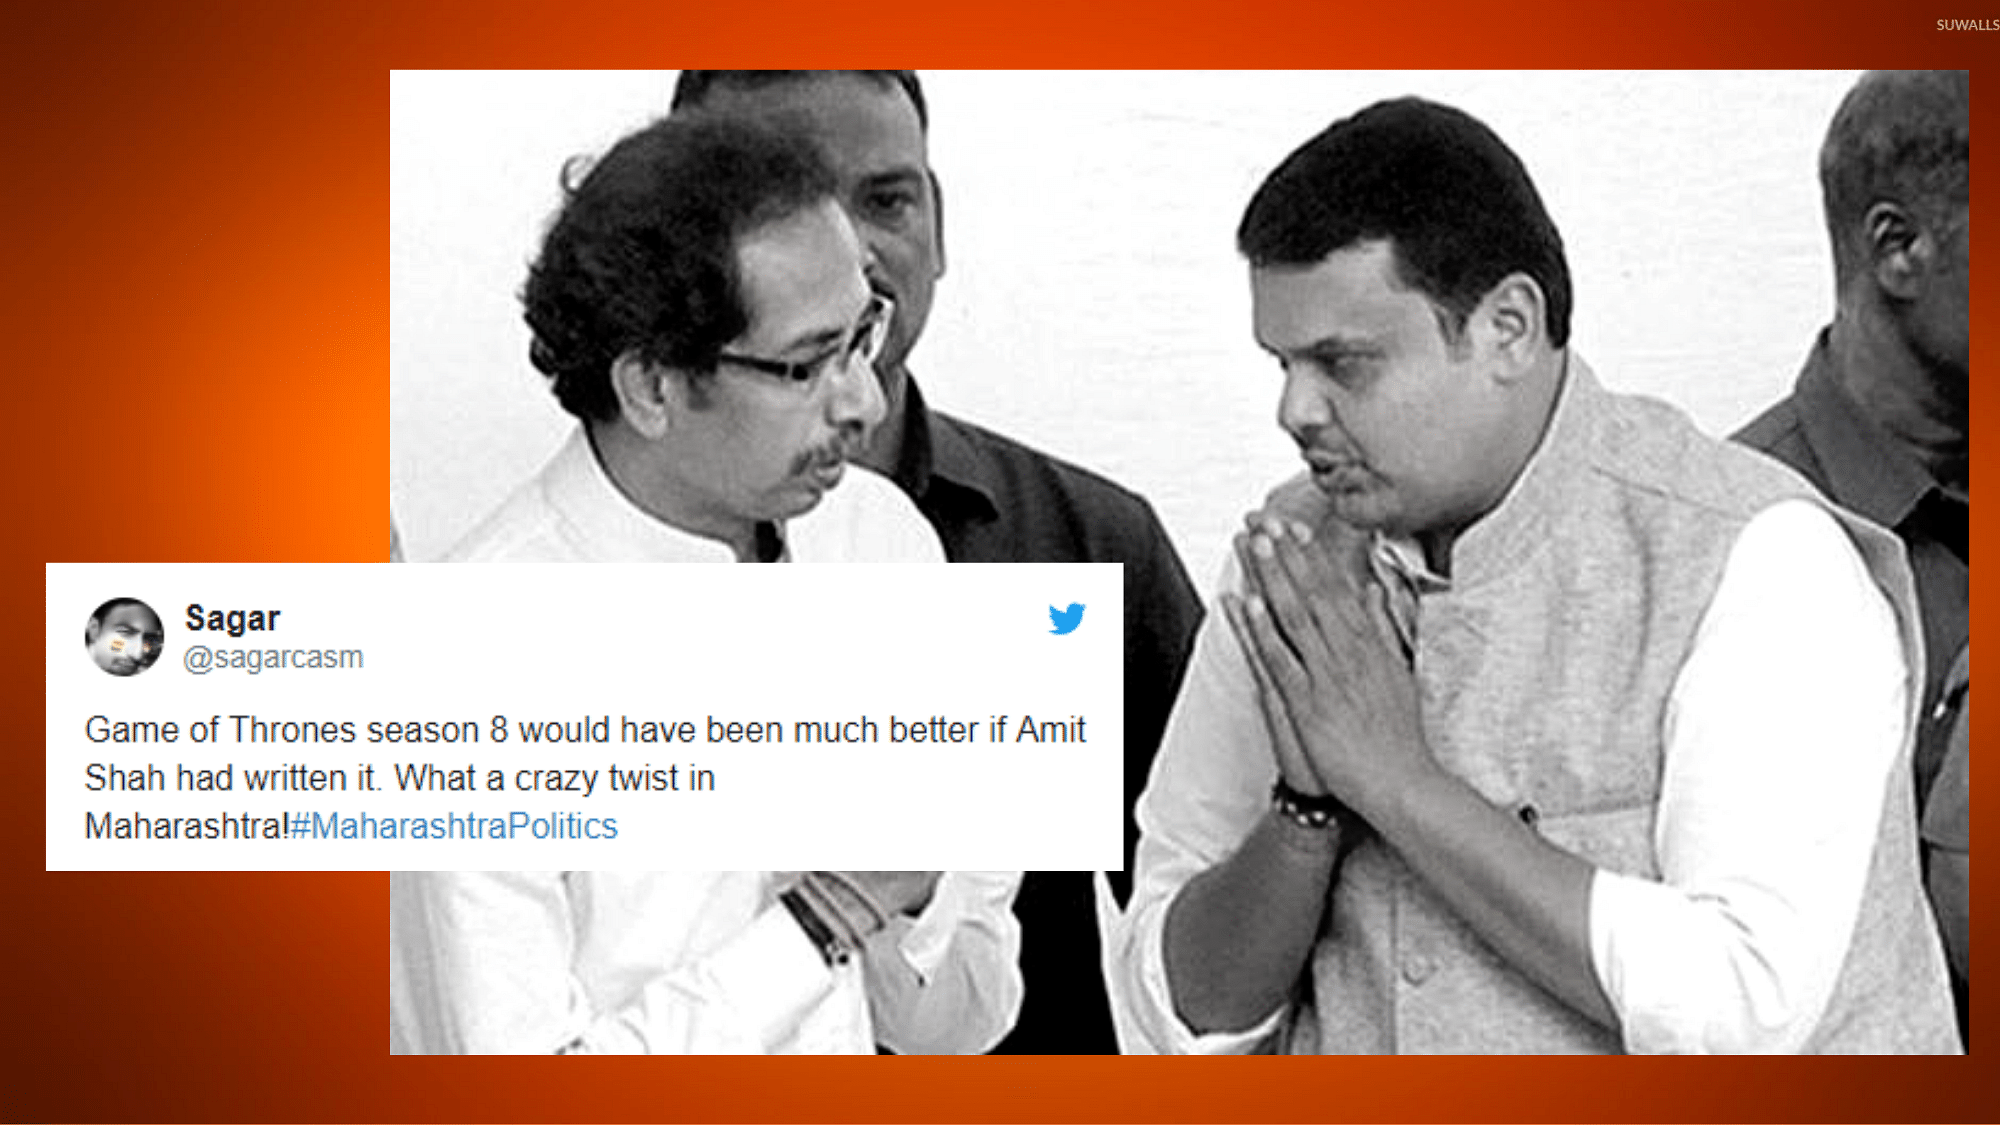 Fadnavis swearing in as CM and NCP’s Ajit Pawar taking oath as Deputy CM on Saturday morning sent the Shiv Sena into a stunned silence and social media into a tizzy.